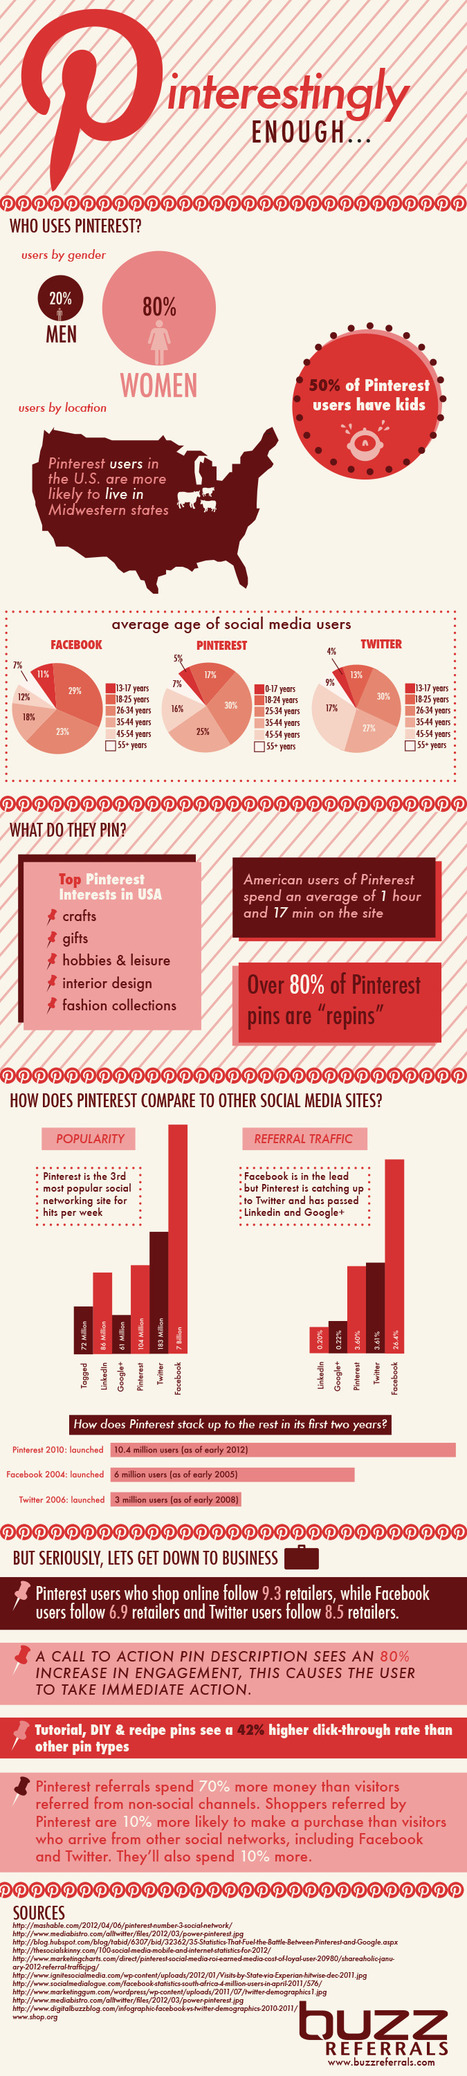 Social Media Infographic: Why Use Pinterest? | Social Media and its influence | Scoop.it